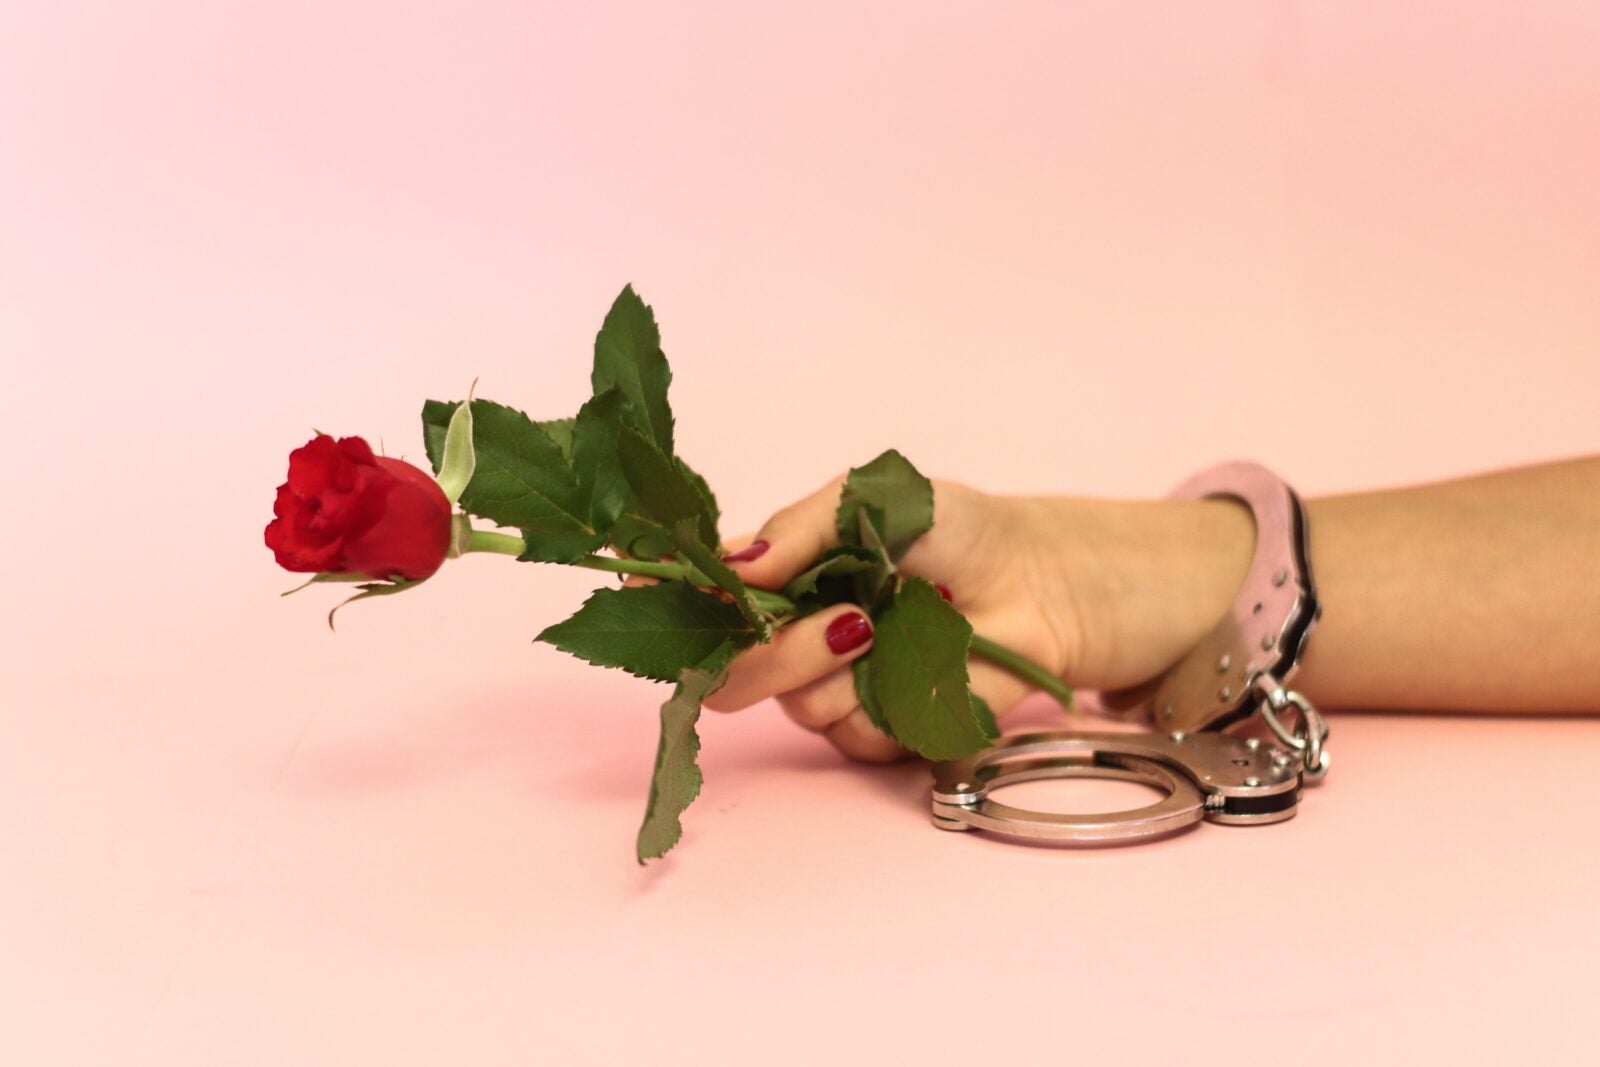 A woman's hand with red painted nails and a handcuff locked at her wrist holding onto a rose stalk.